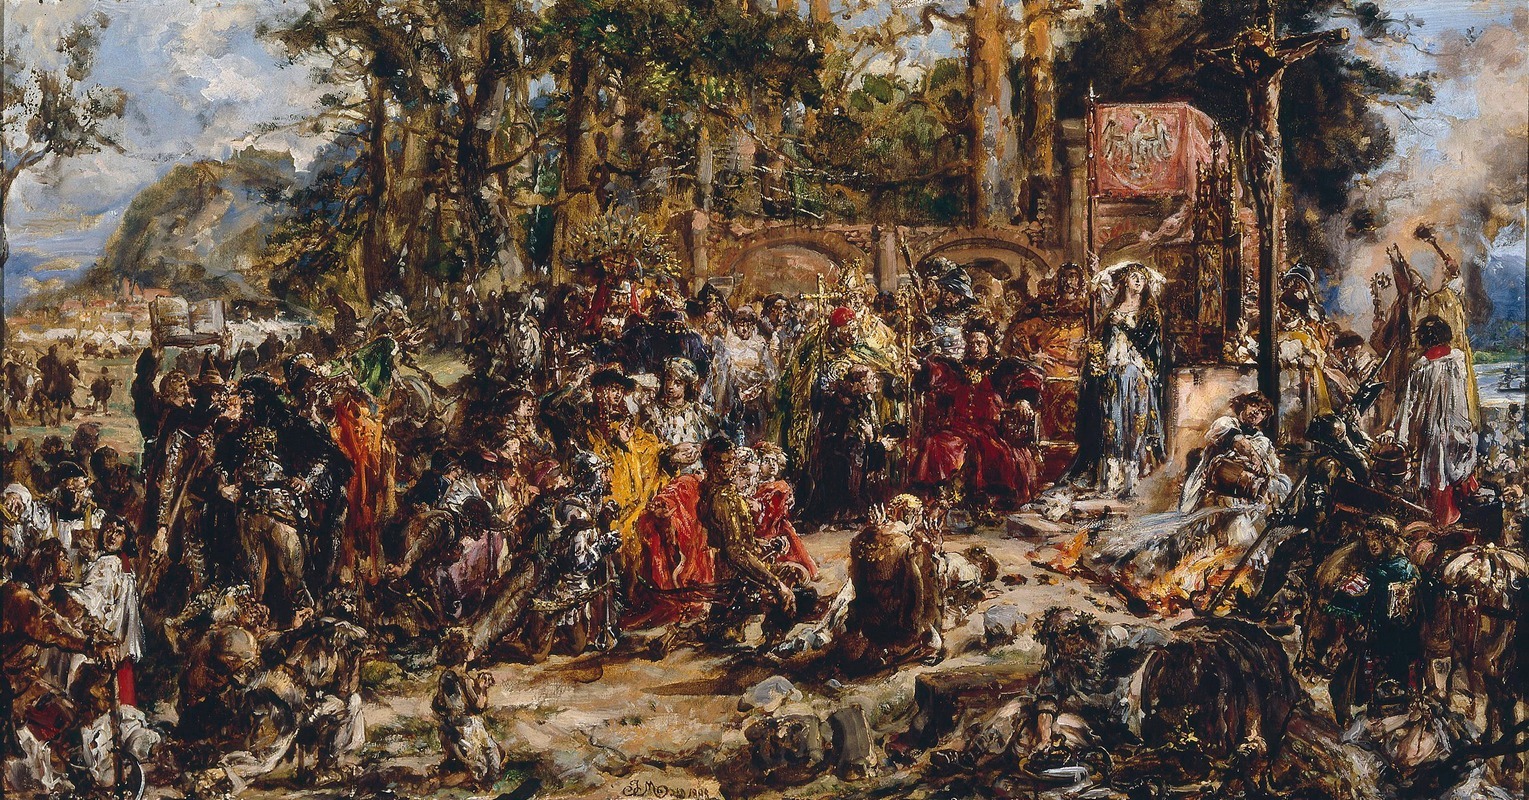 Jan Matejko - Baptism of Lithuania, from the series “History of Civilization in Poland”